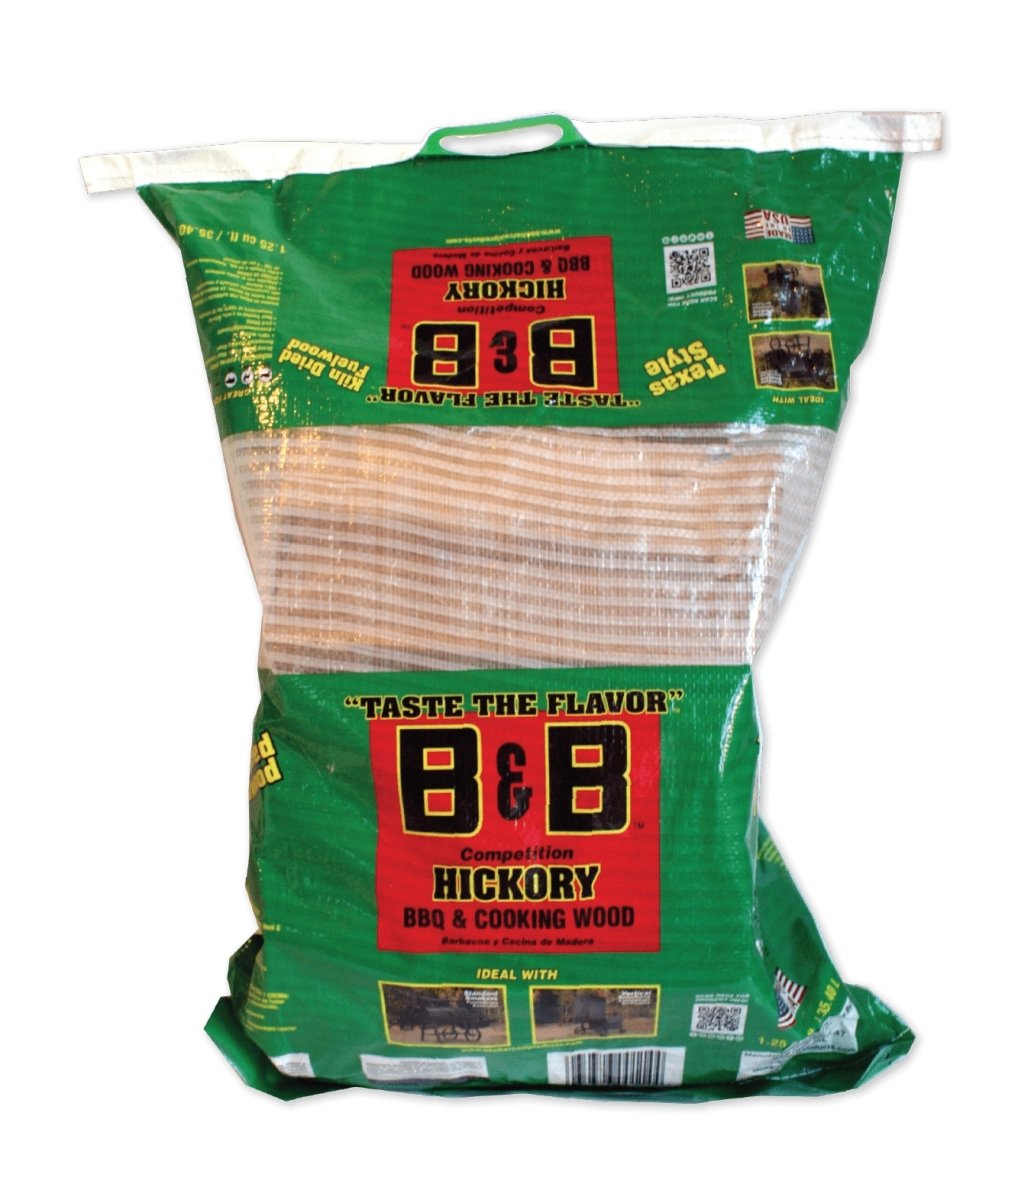 BB Hickory Premium Cooking Logs 1.25 Cubic Foot - Texas Star Grill Shop C00114